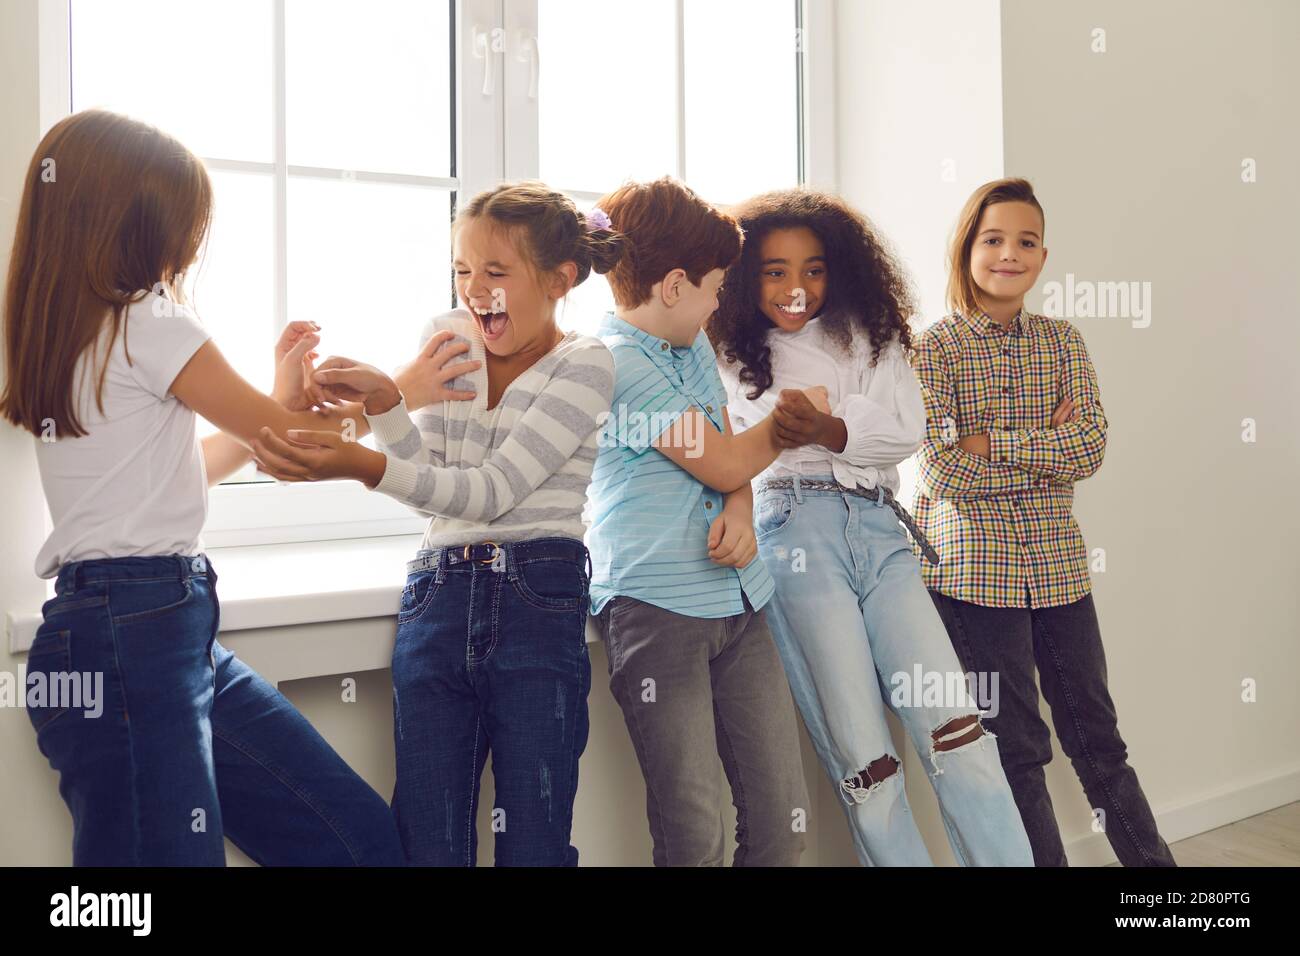 Active group of multiethnic children have fun together and tickle each other standing by the window. Stock Photo